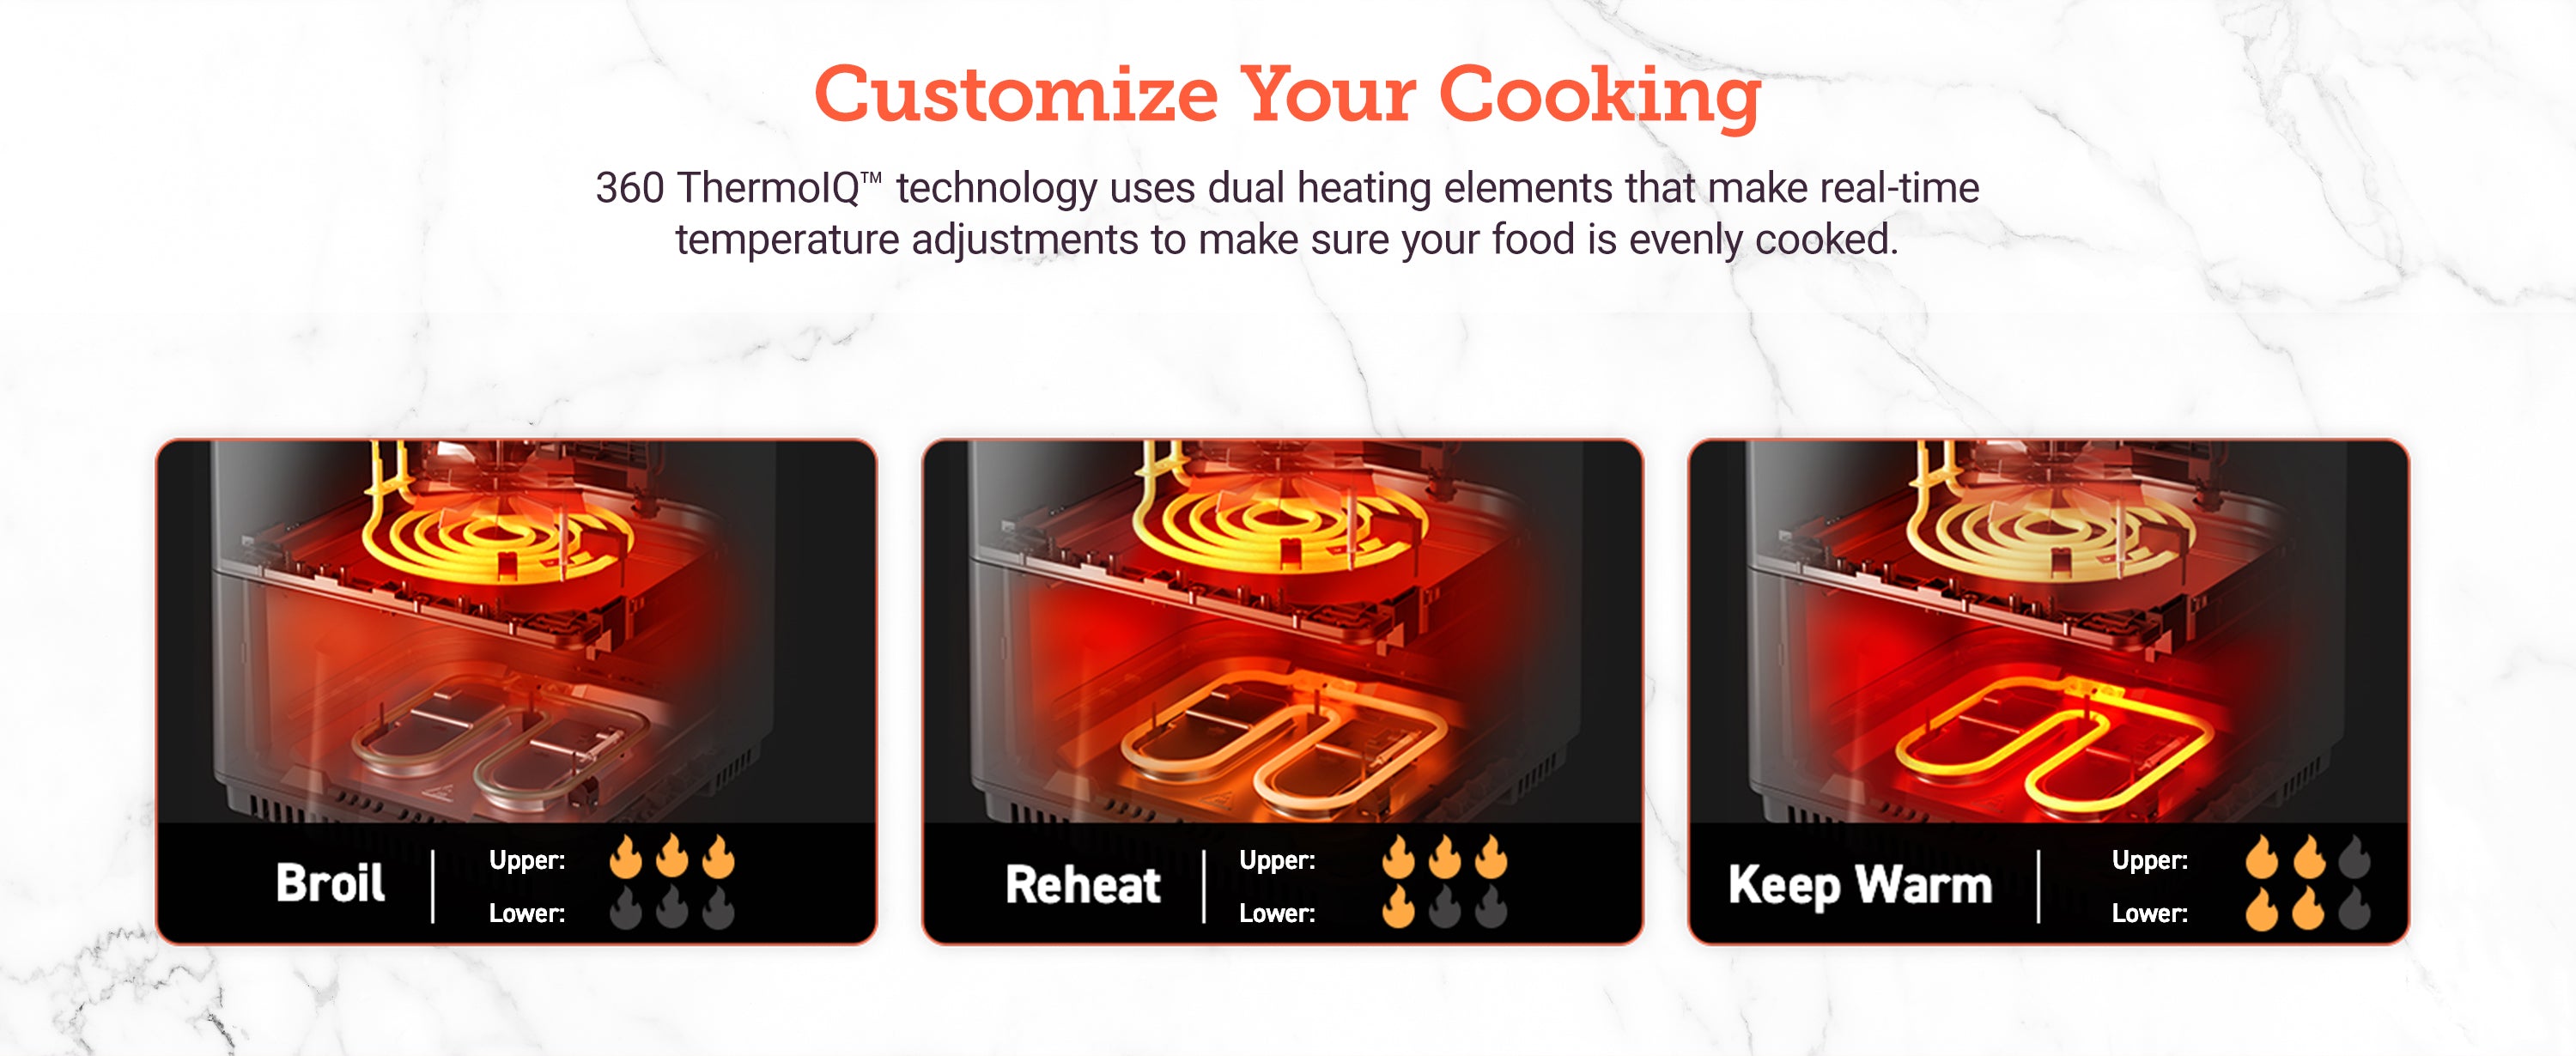 Customize Your Cooking: 360ThermoIQTM technology uses dual heating elements that make real-time temperature adjustments to make sure your food is evenly cooked.